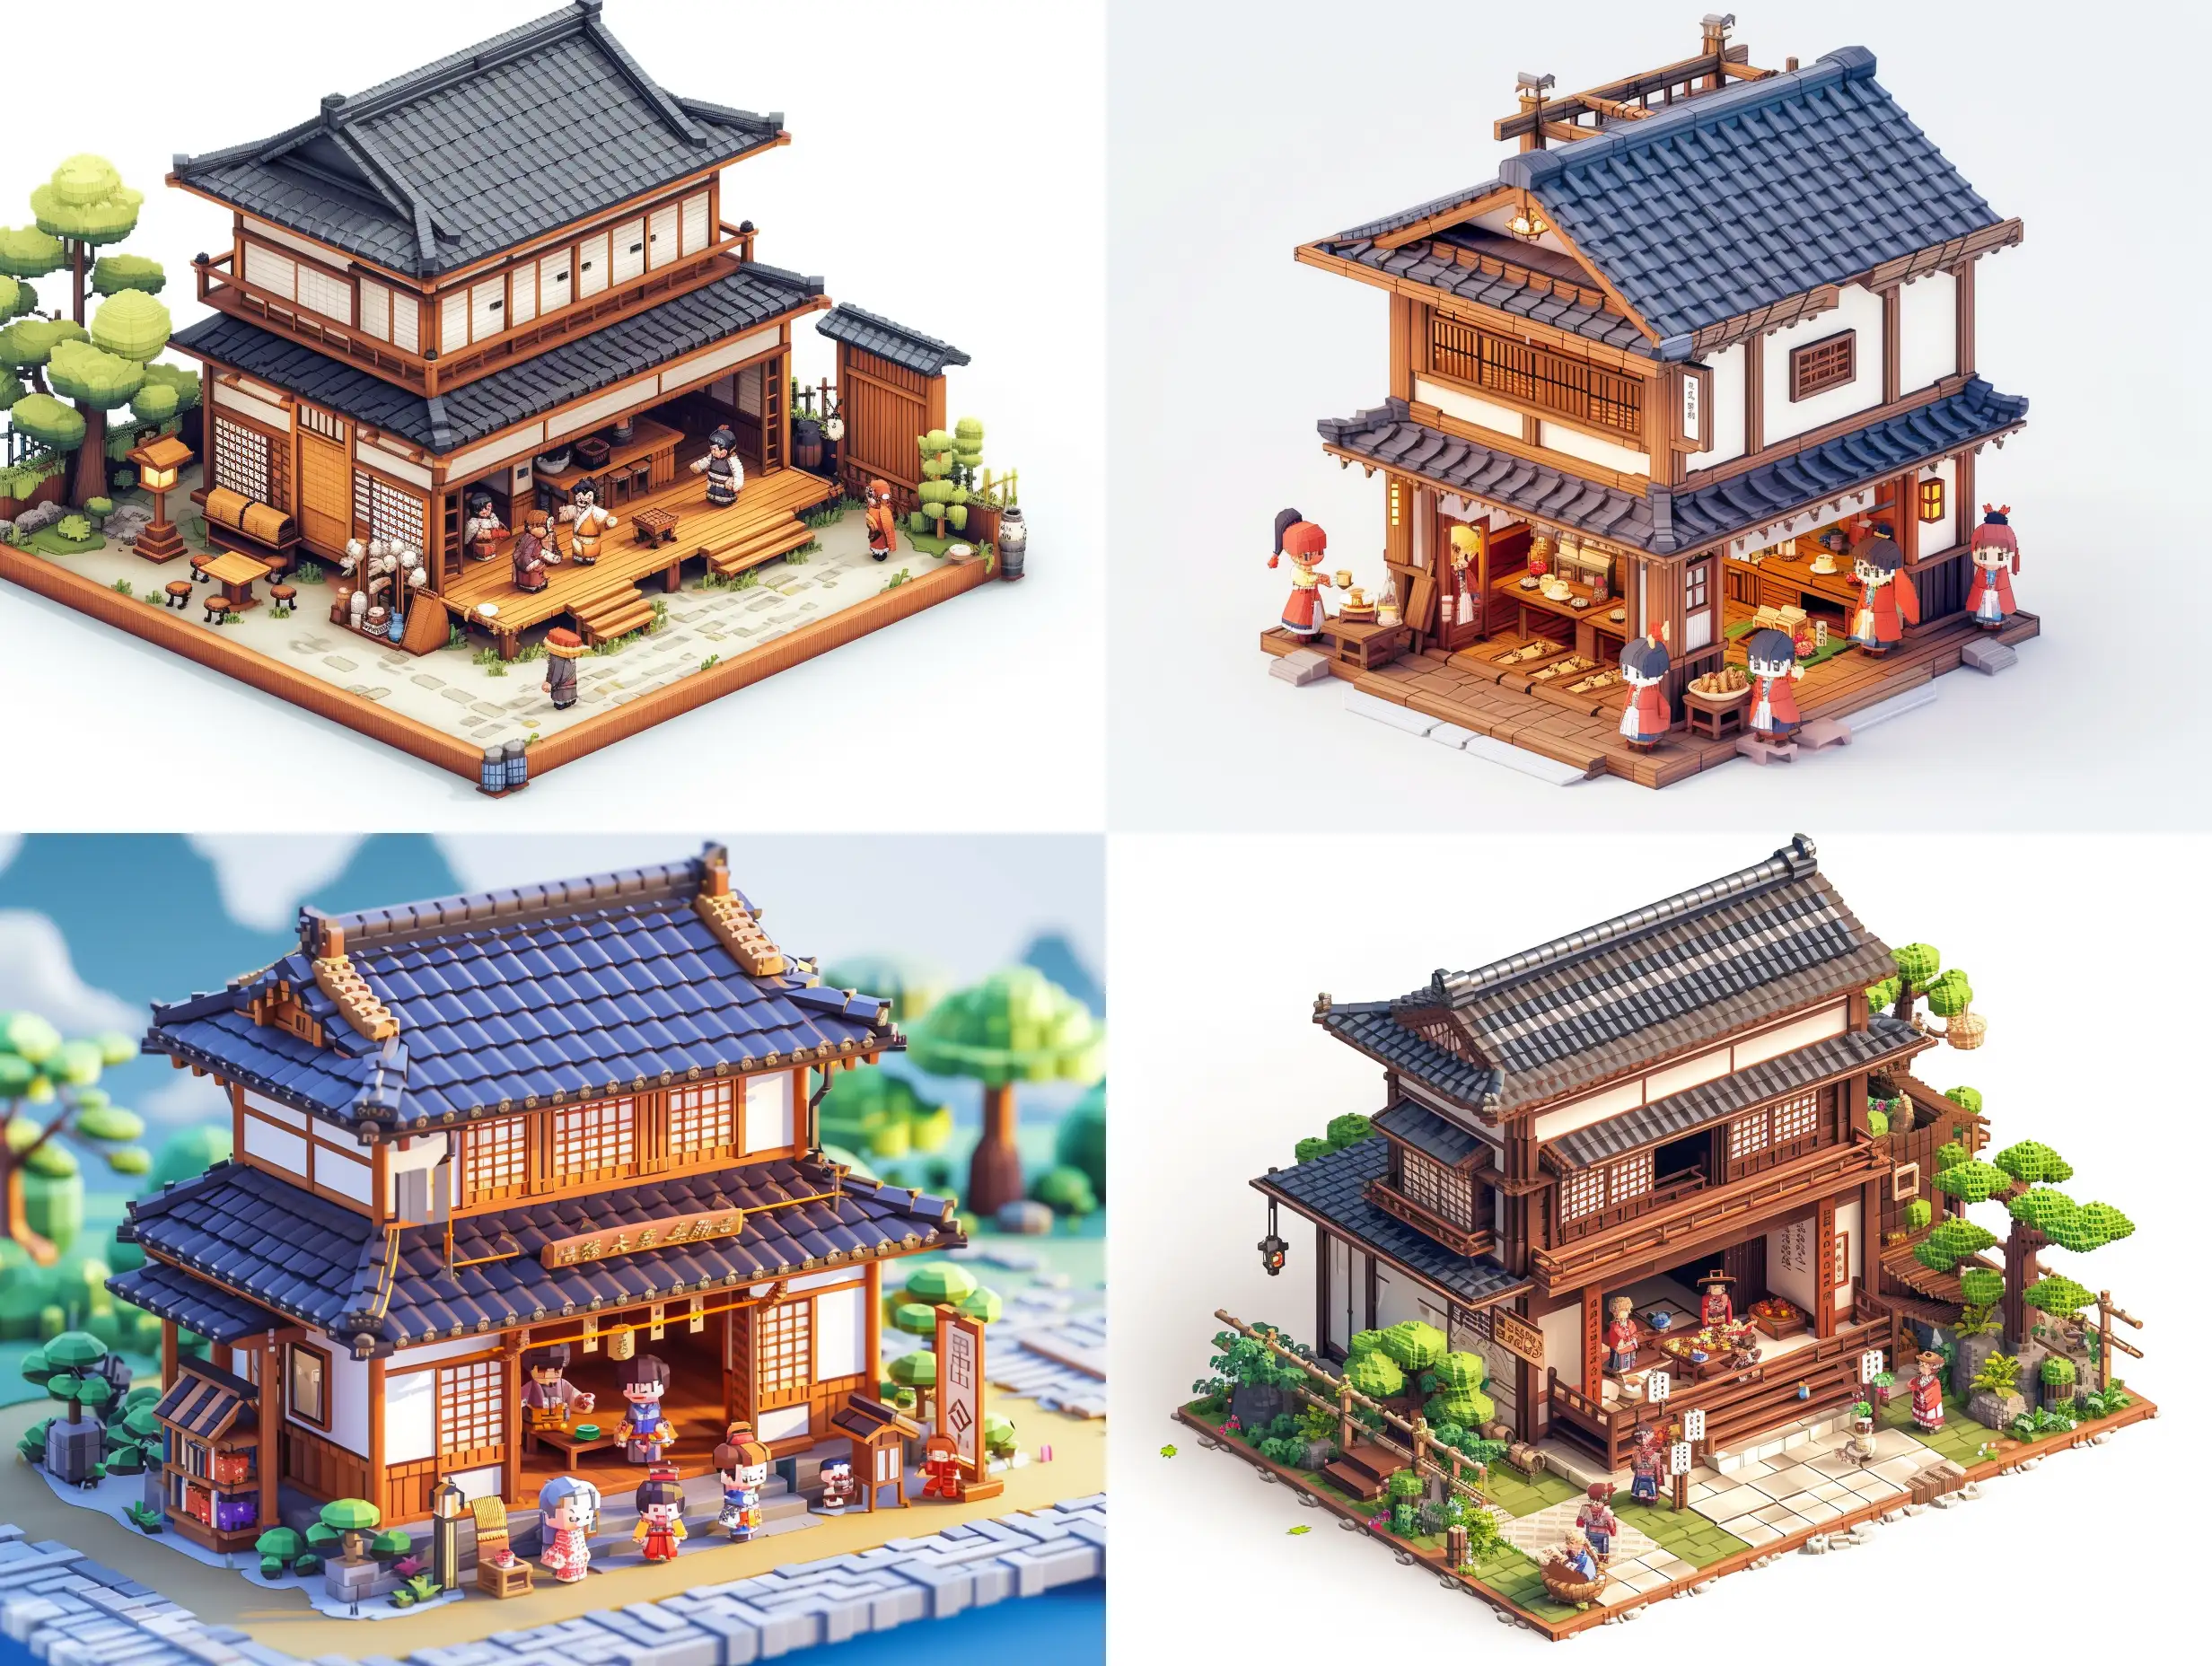 A  that is the style of a house with the style of Japan during the samurai era 3D game design cute from side isometric pixel art colorful with small people in it drink tea